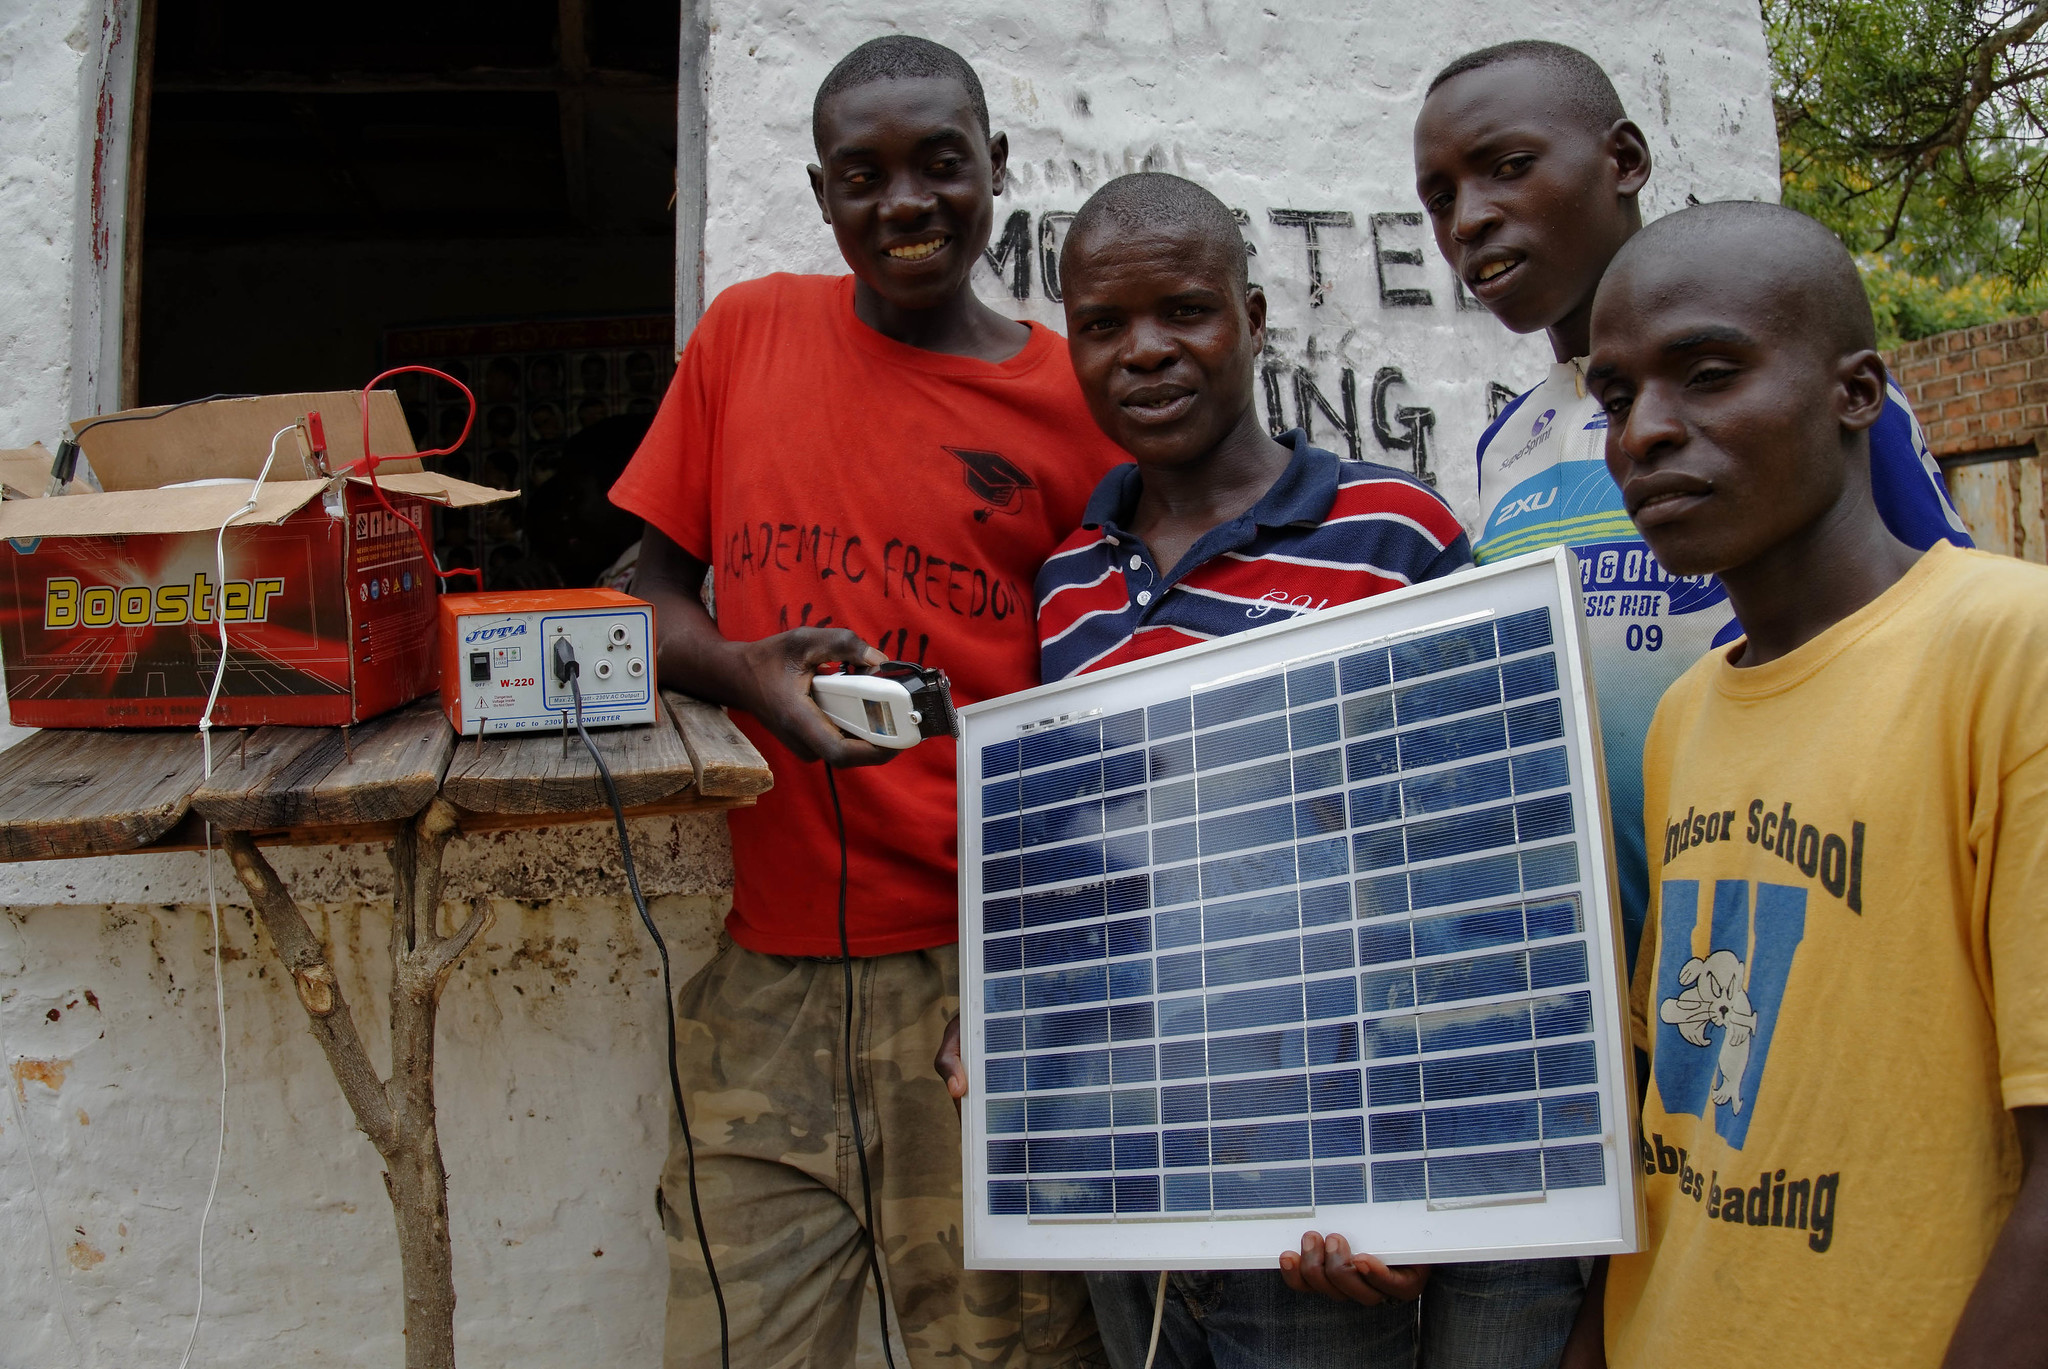 Group of 4 young black men smiling and holding a small solar panel with a portable battery charger